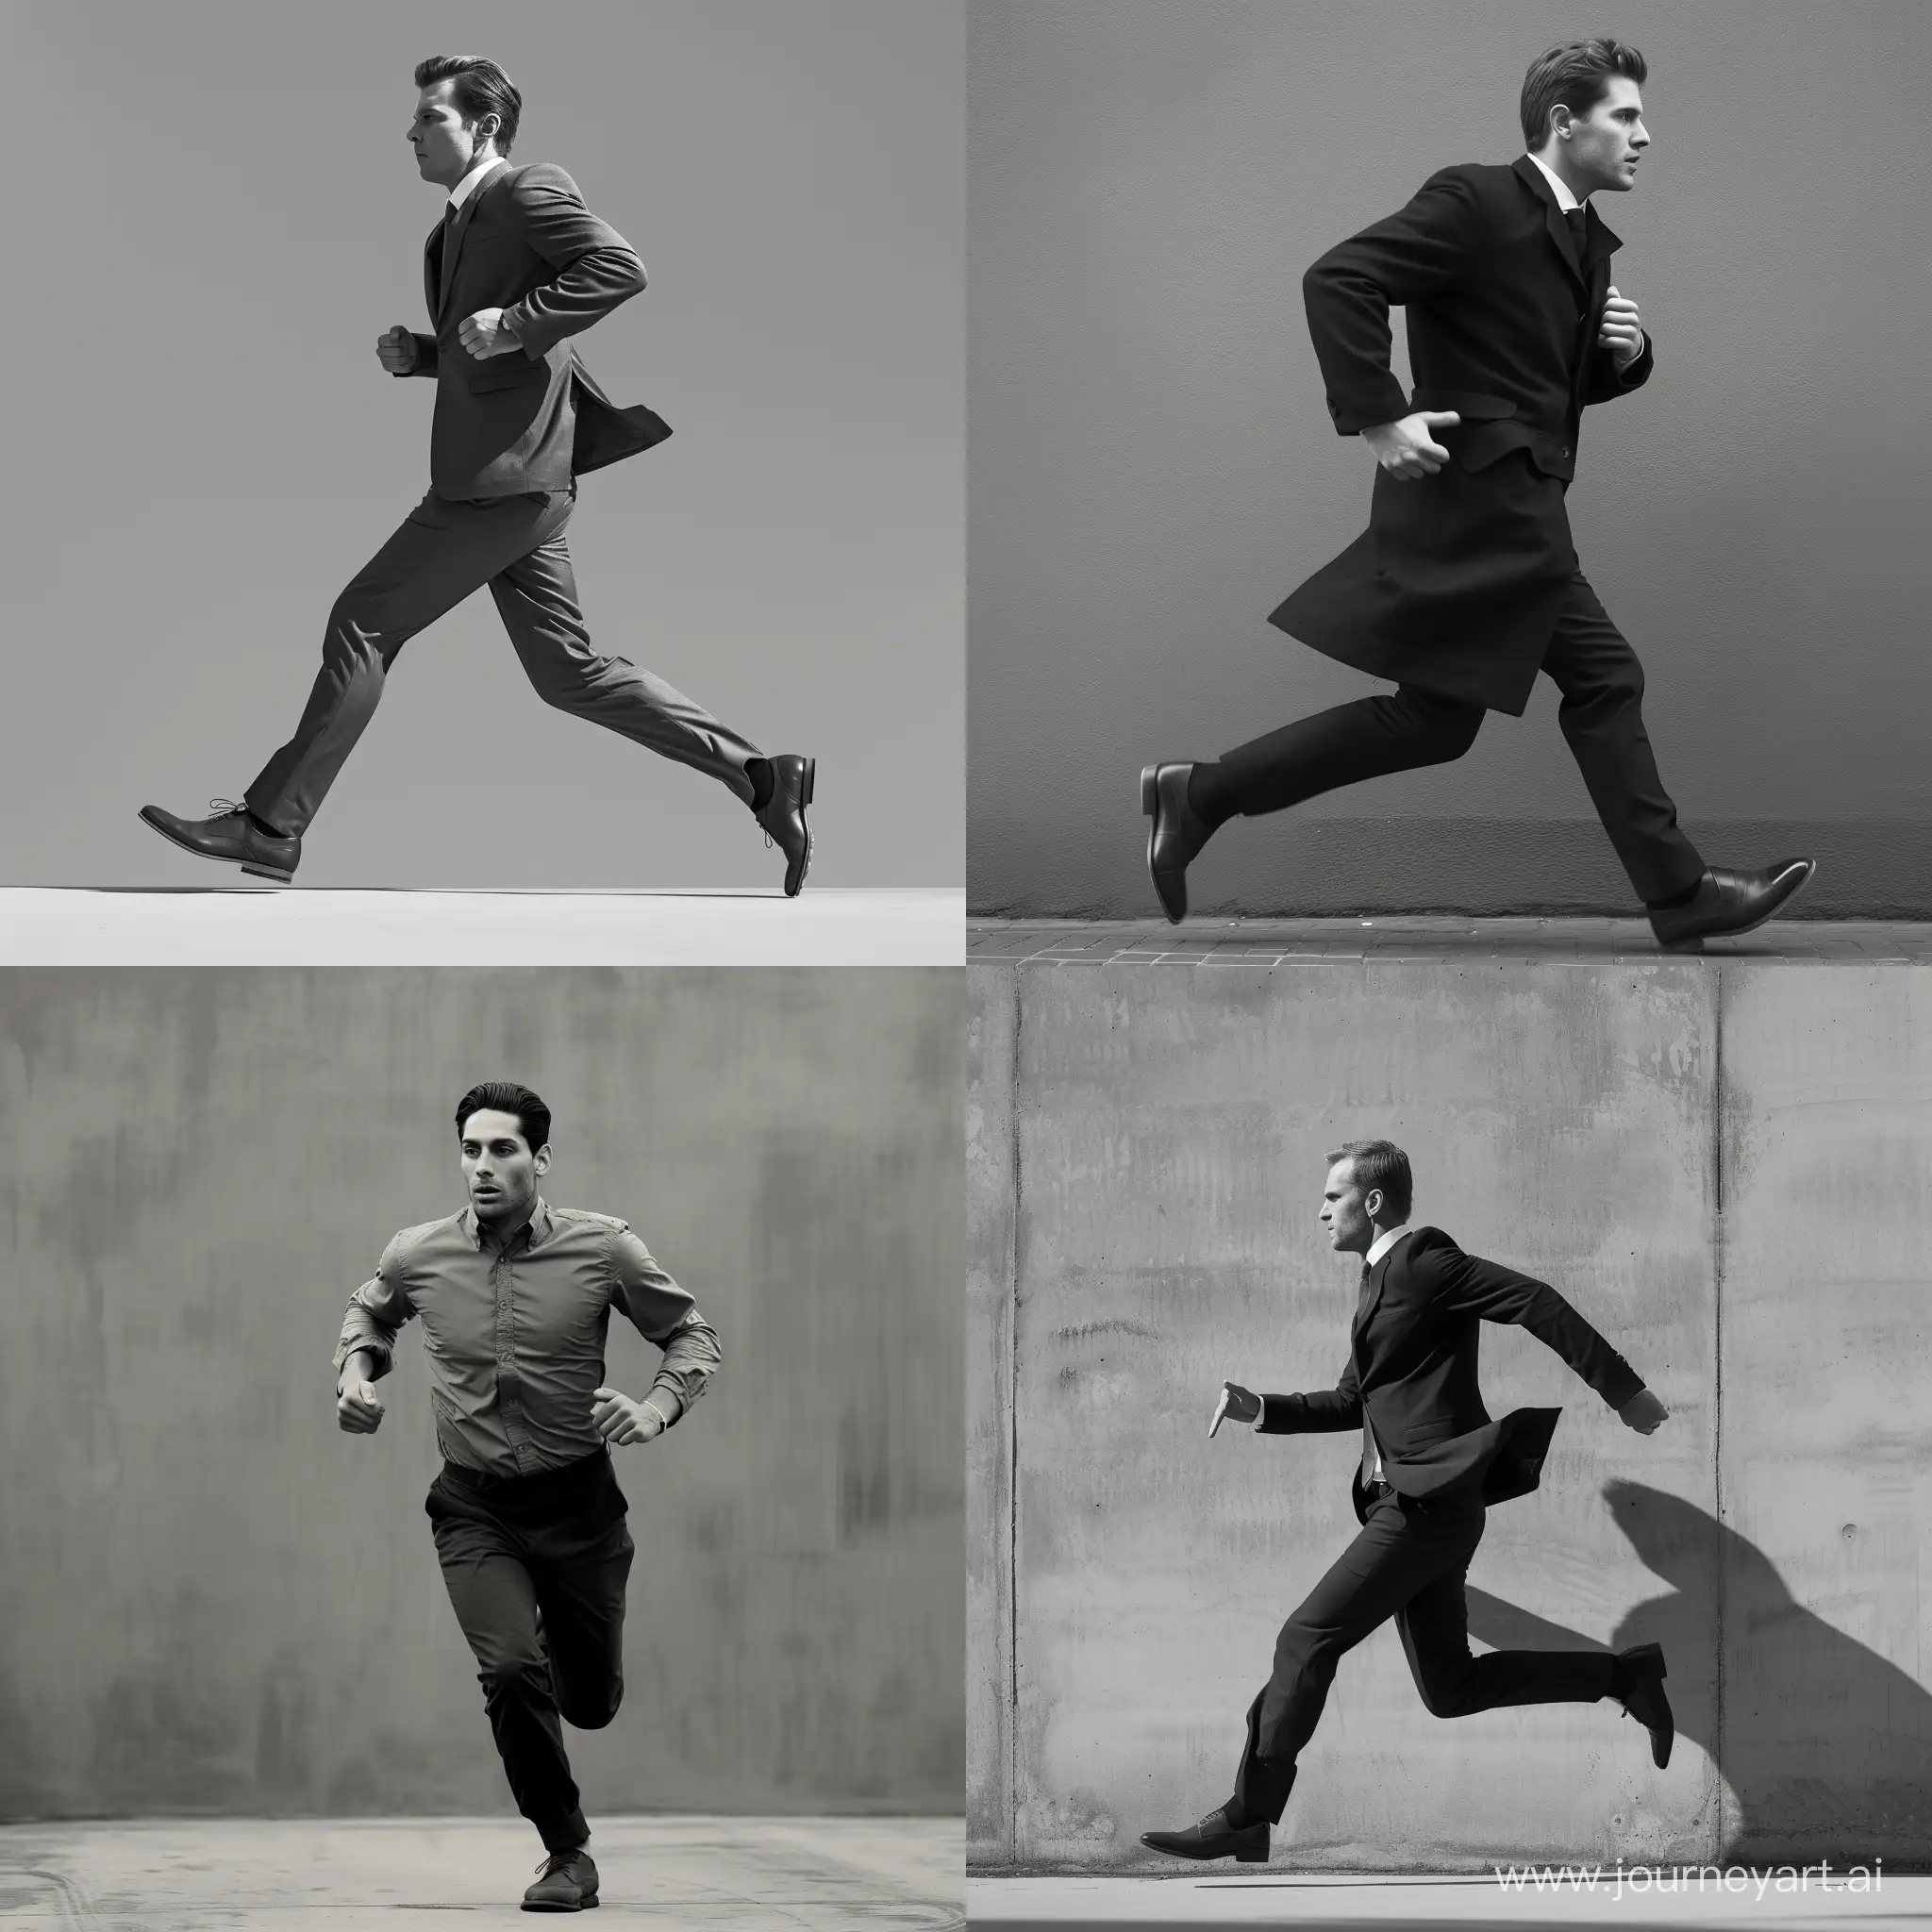 Stylish-Man-Running-Late-in-Black-and-White-Photo